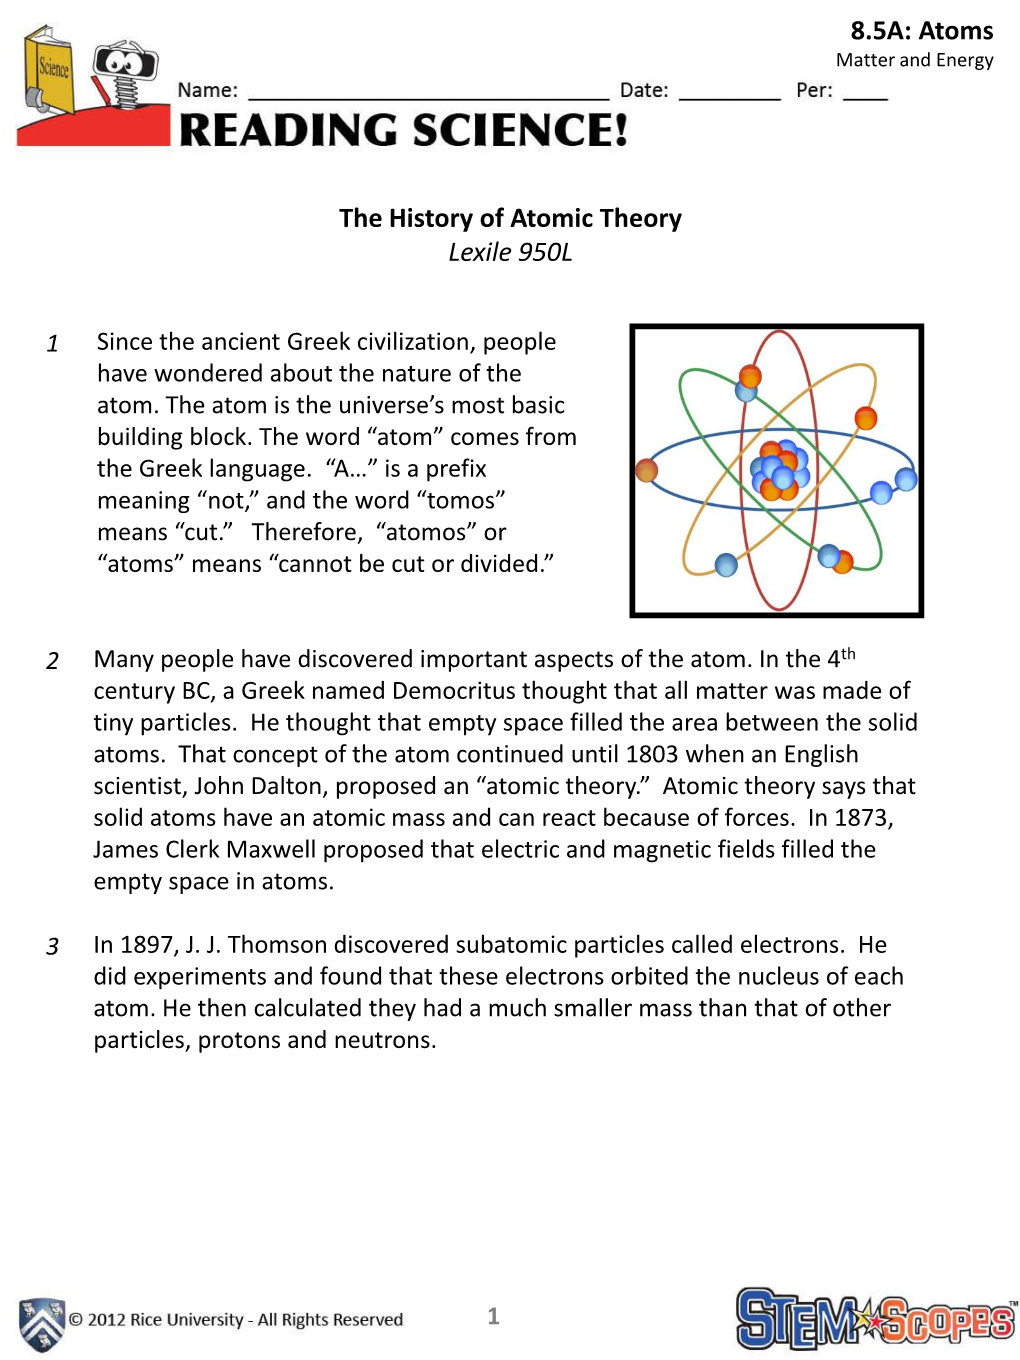 The History of Atomic Theory Lexile 950L 8.5A: Atoms